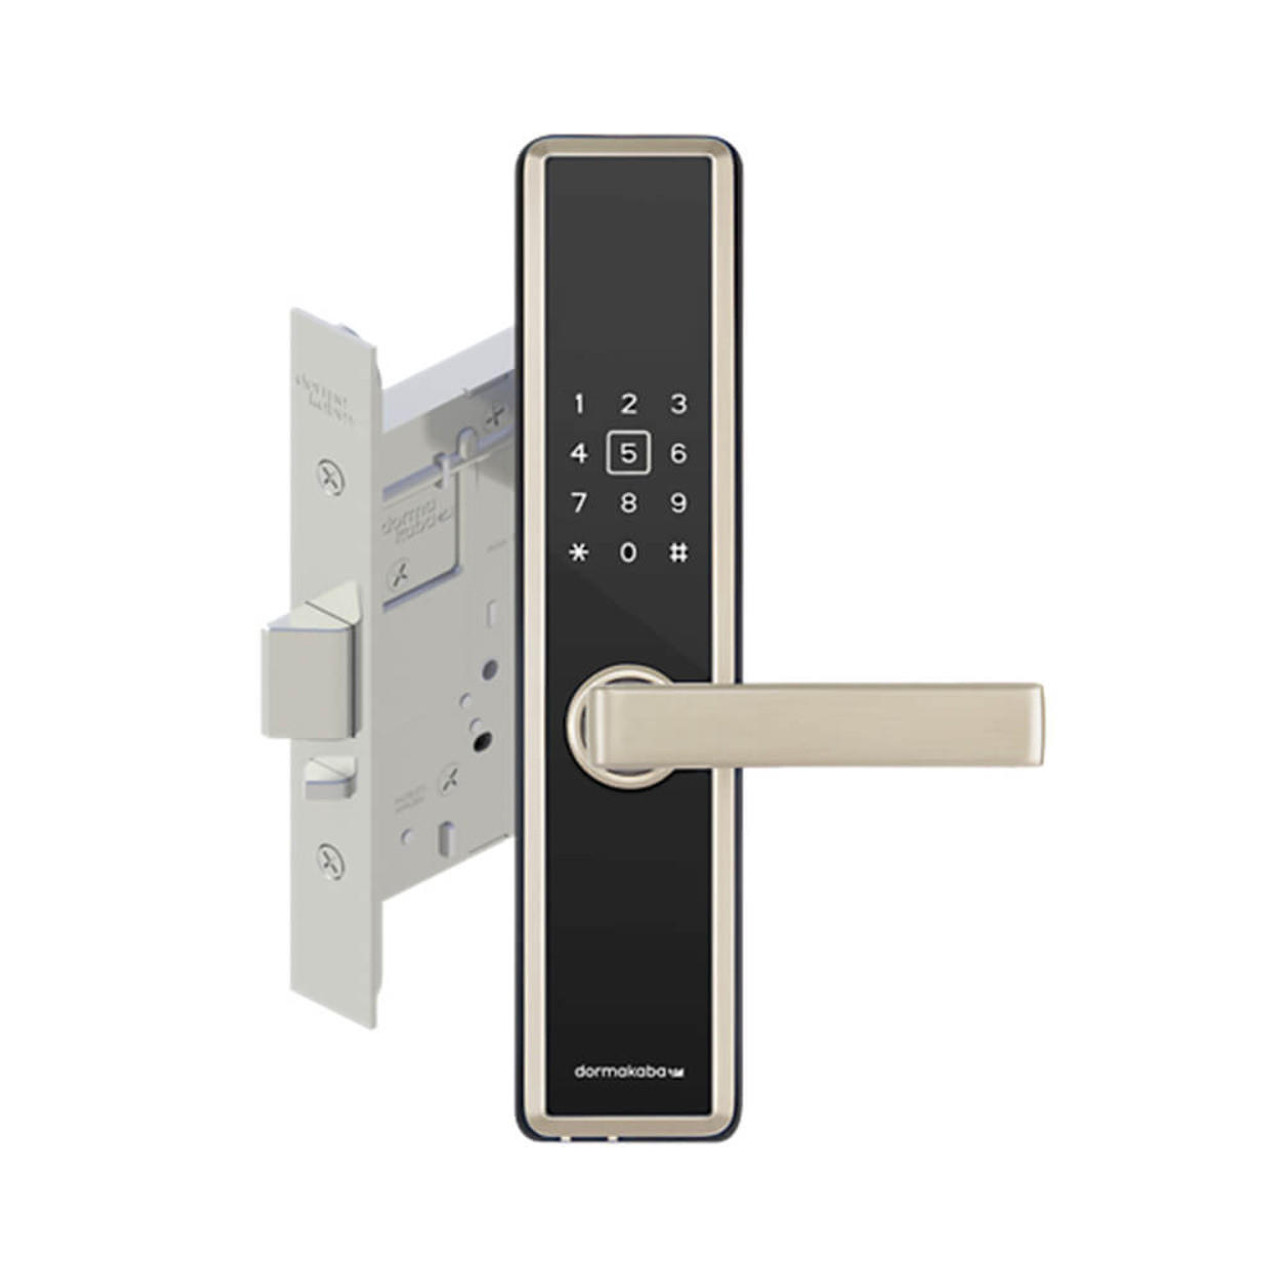  Dormakaba M5 Digital Lock with Fire Rated Mortice Lock Brushed Nickel - 9400000007453 